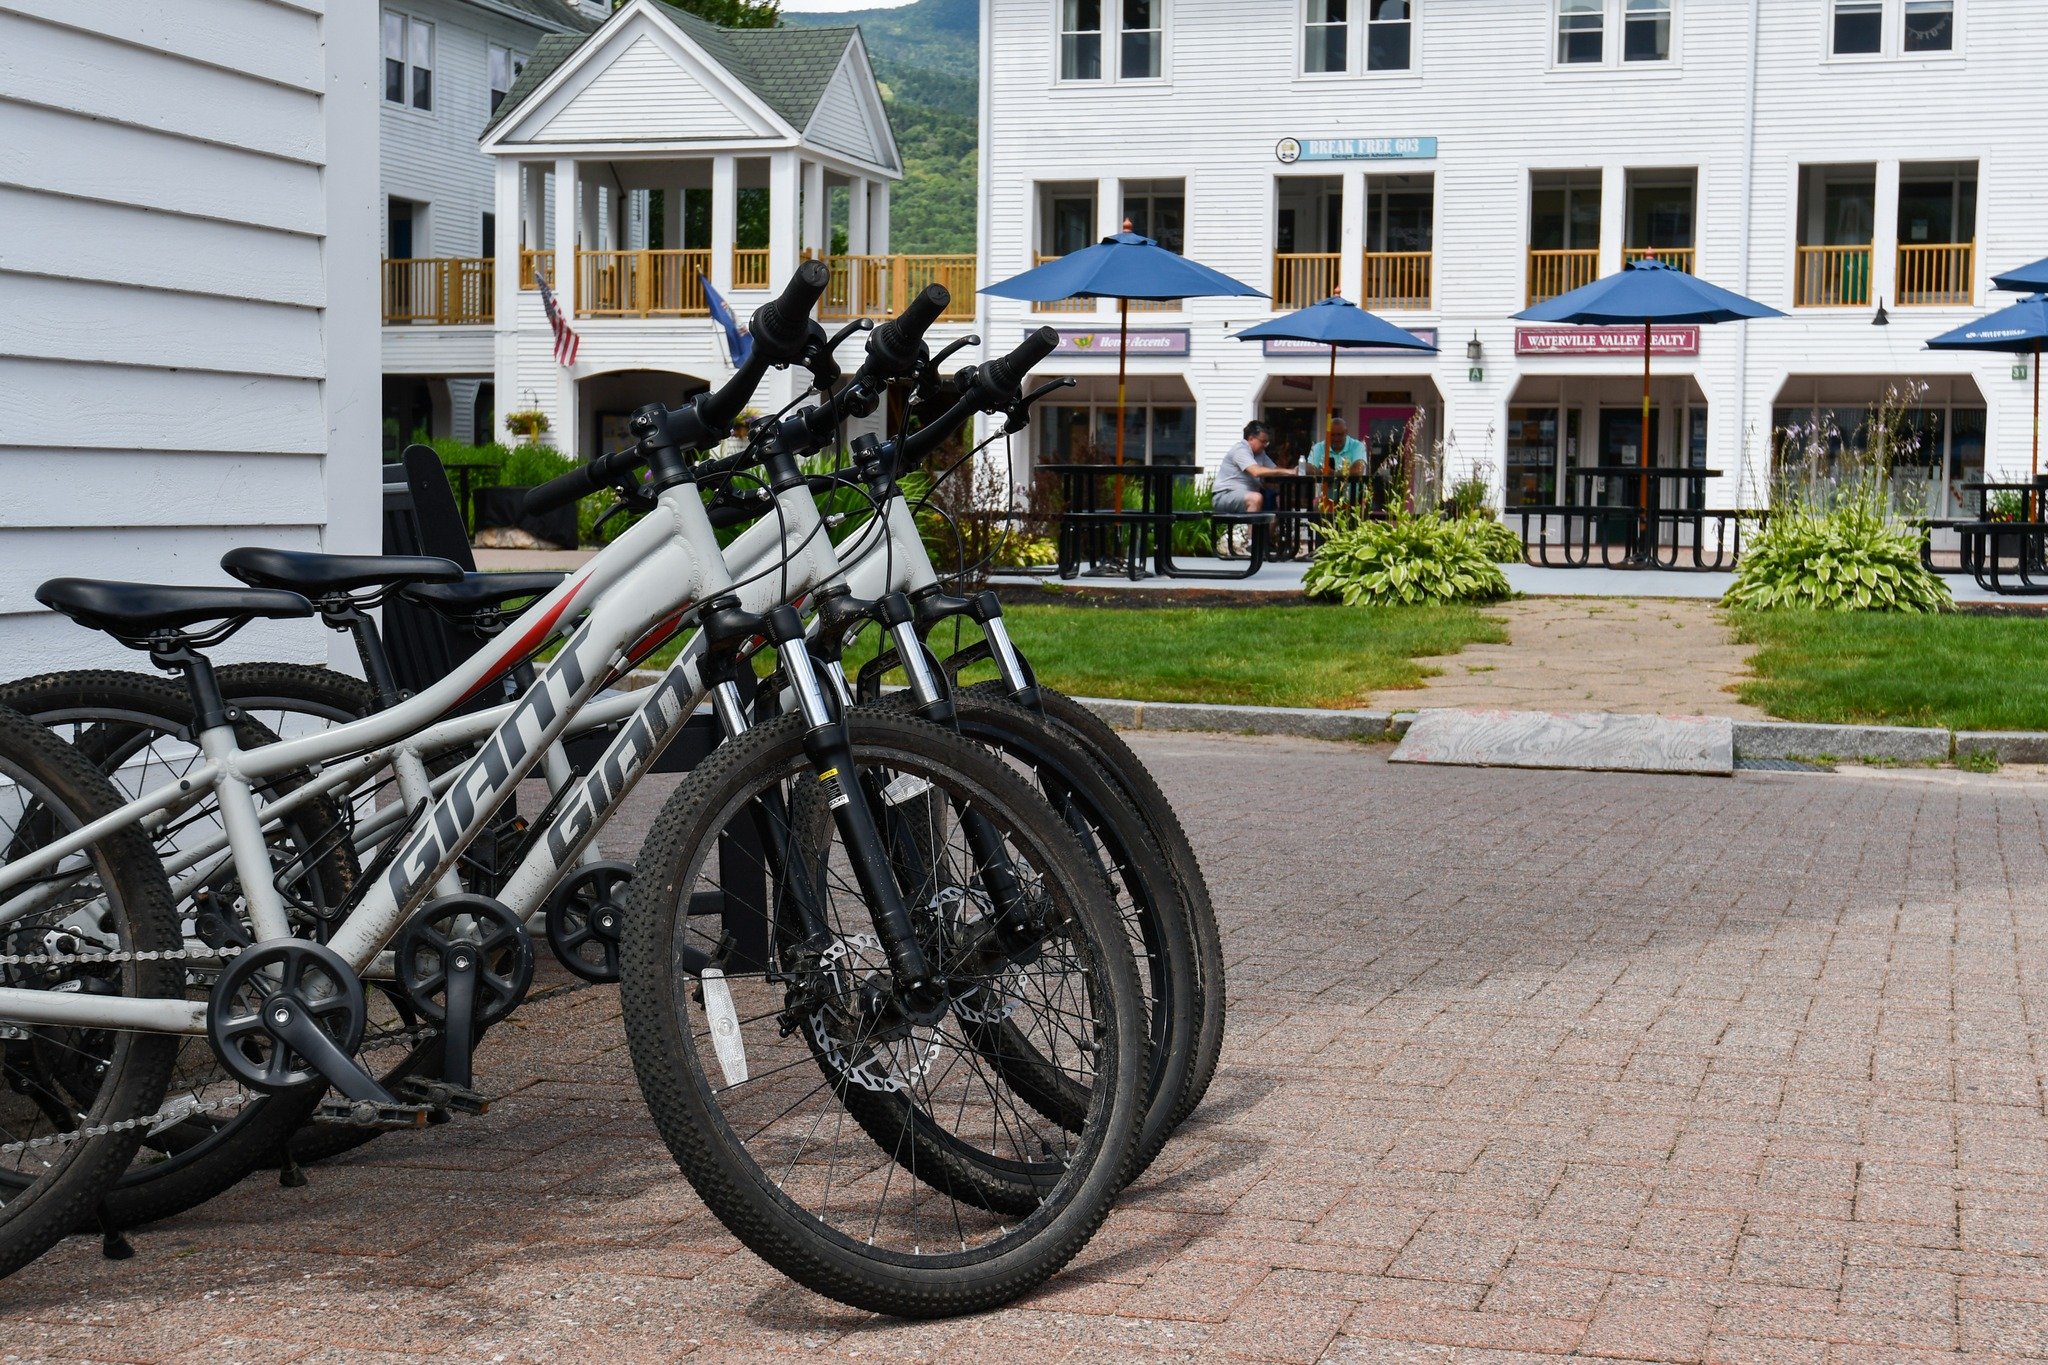 Get the most out of your summer - The Adventure Center in Town Square offers bike repairs and bikes for sale! 

Whether you&rsquo;re dusting off a classic from the garage, dialing in a newly purchased ride, or just need a good once over since your la